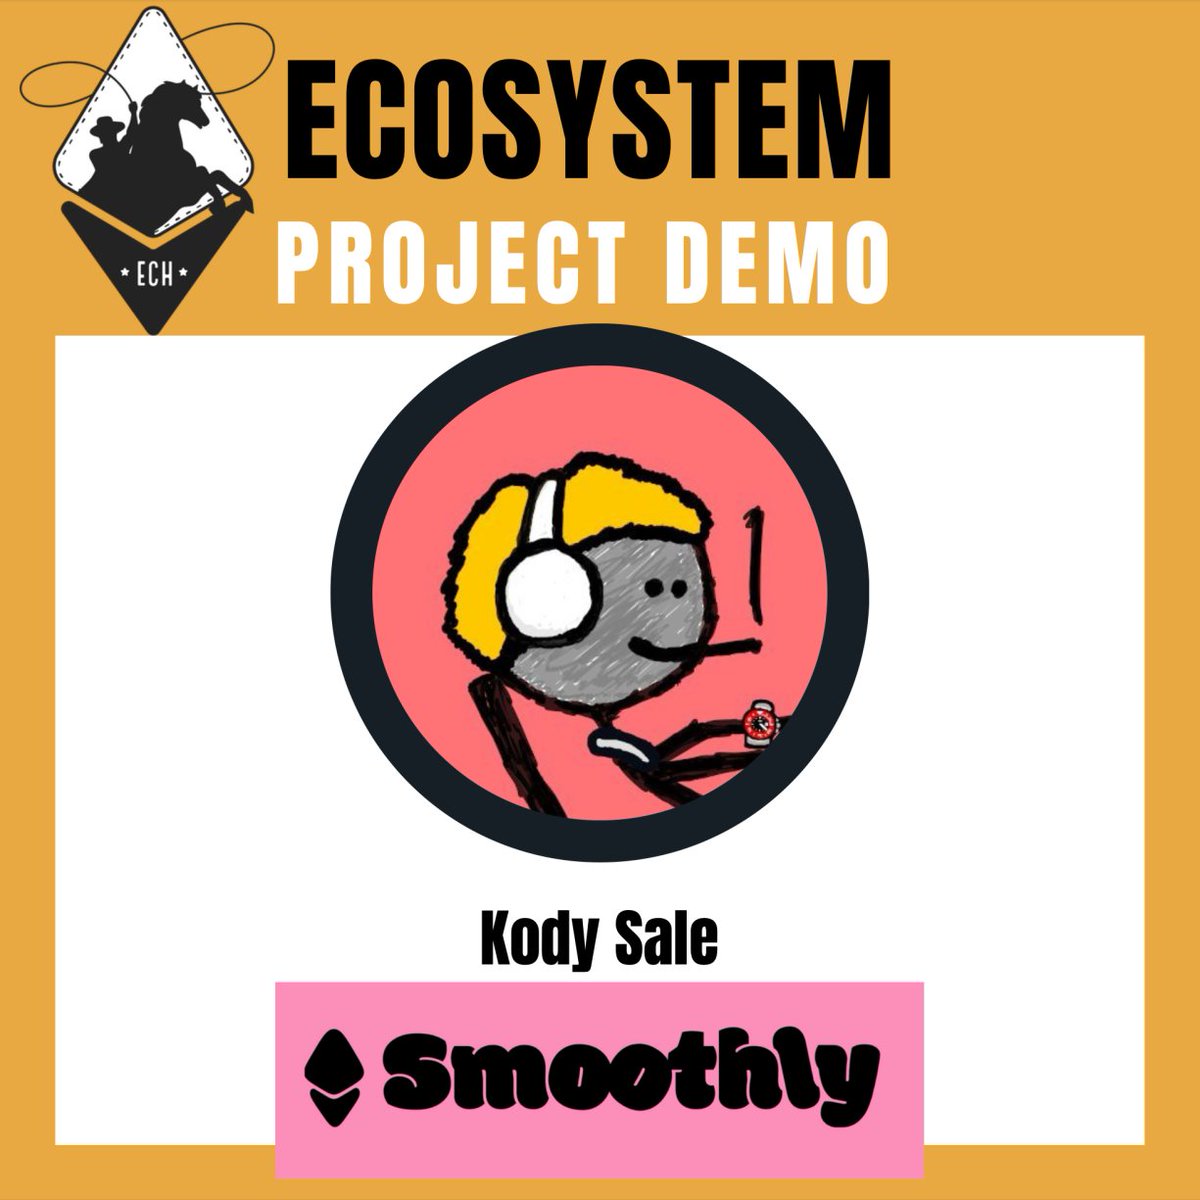 New Ecosystem Project Demo! @ksale001 joins us to talk about Smoothly, a MEV Smoothing tool for home stakers to pool execution layer rewards with other home stakers! 🎧 youtube.com/watch?v=3vmioH… Production by @zkdoof Learn more about Smoothly at smoothly.money